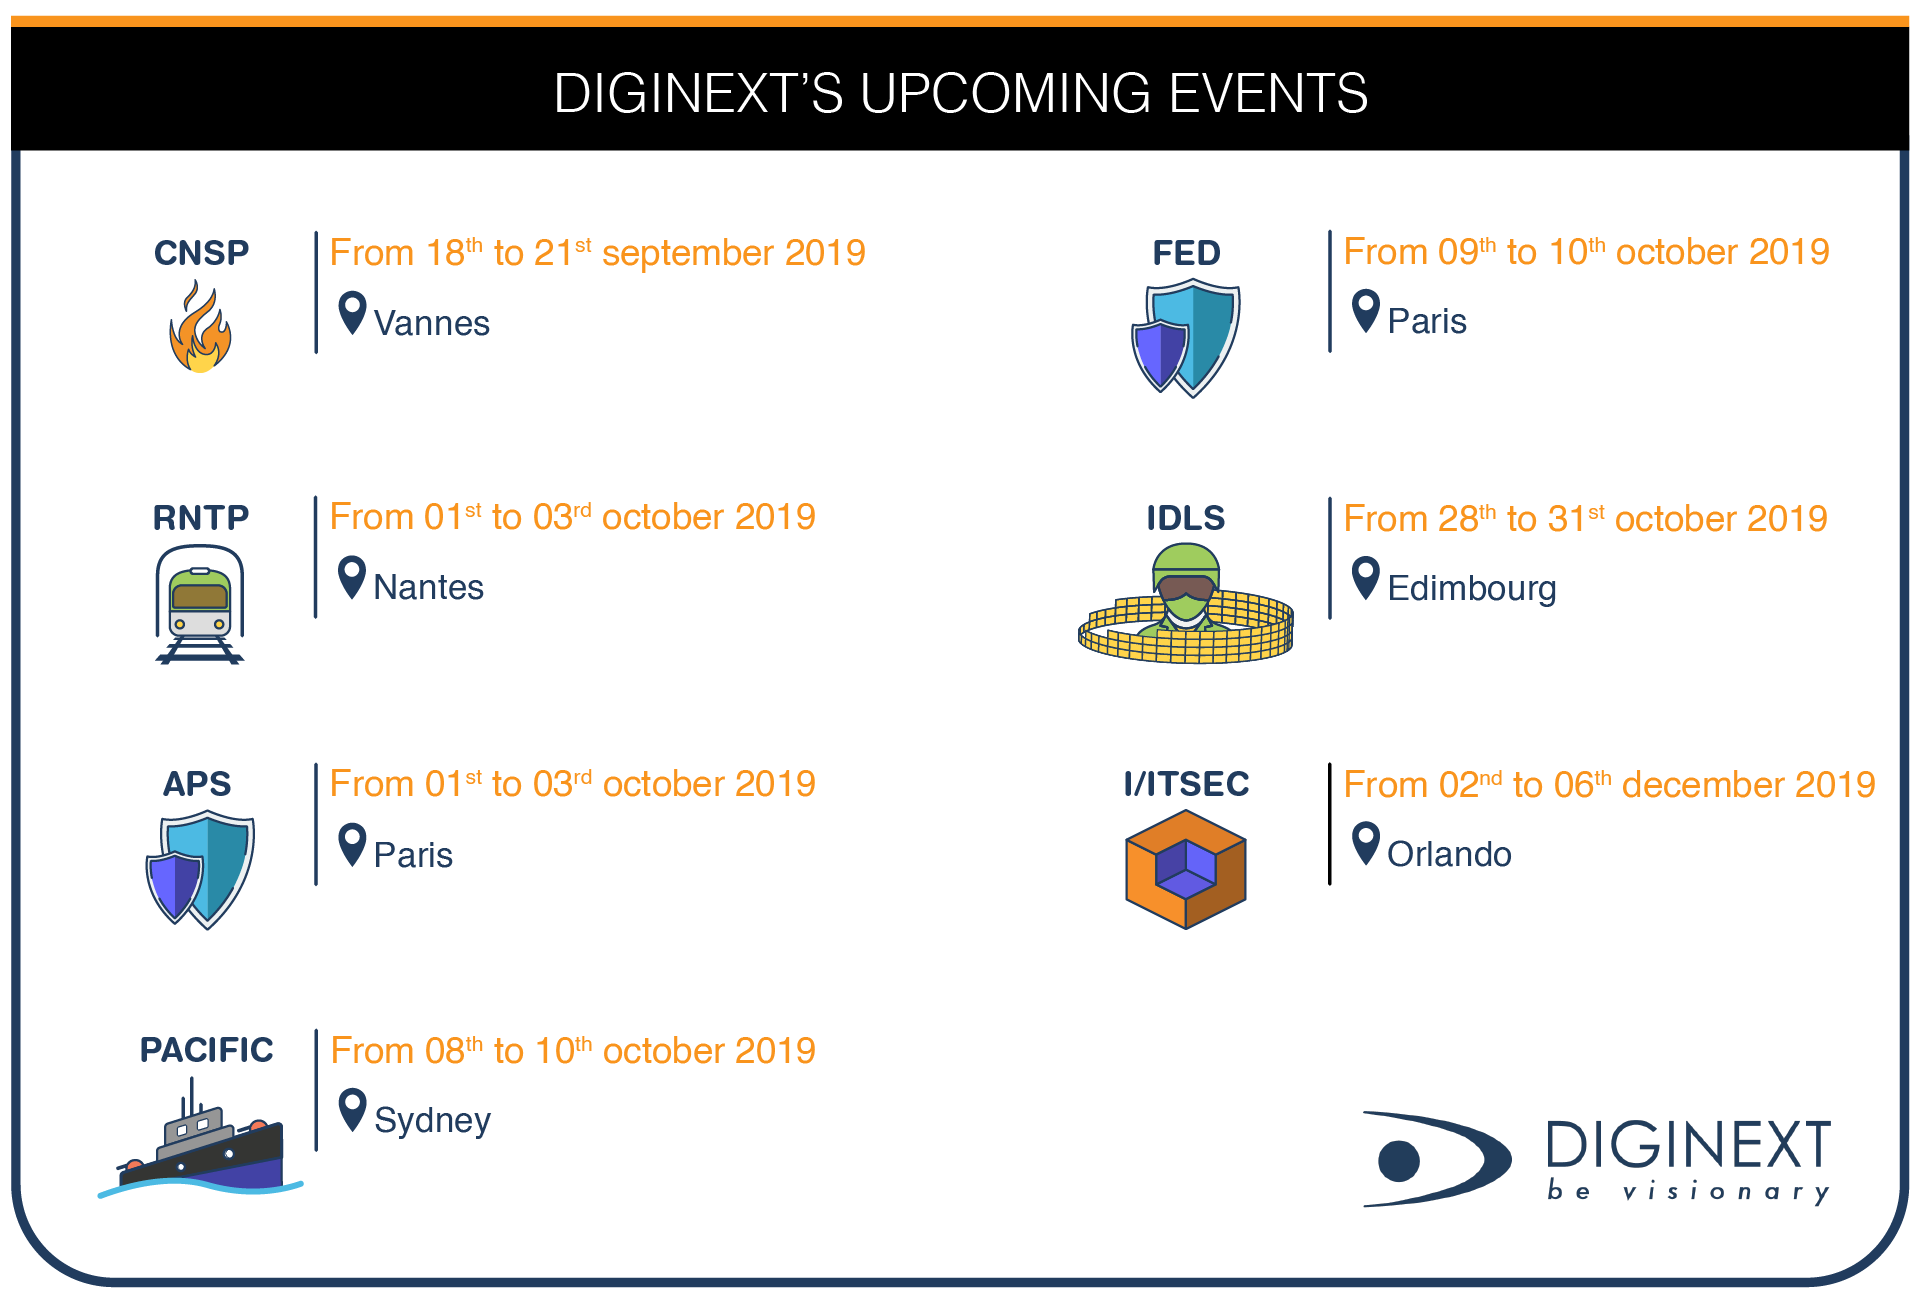 DIGINEXT upcoming events 2019